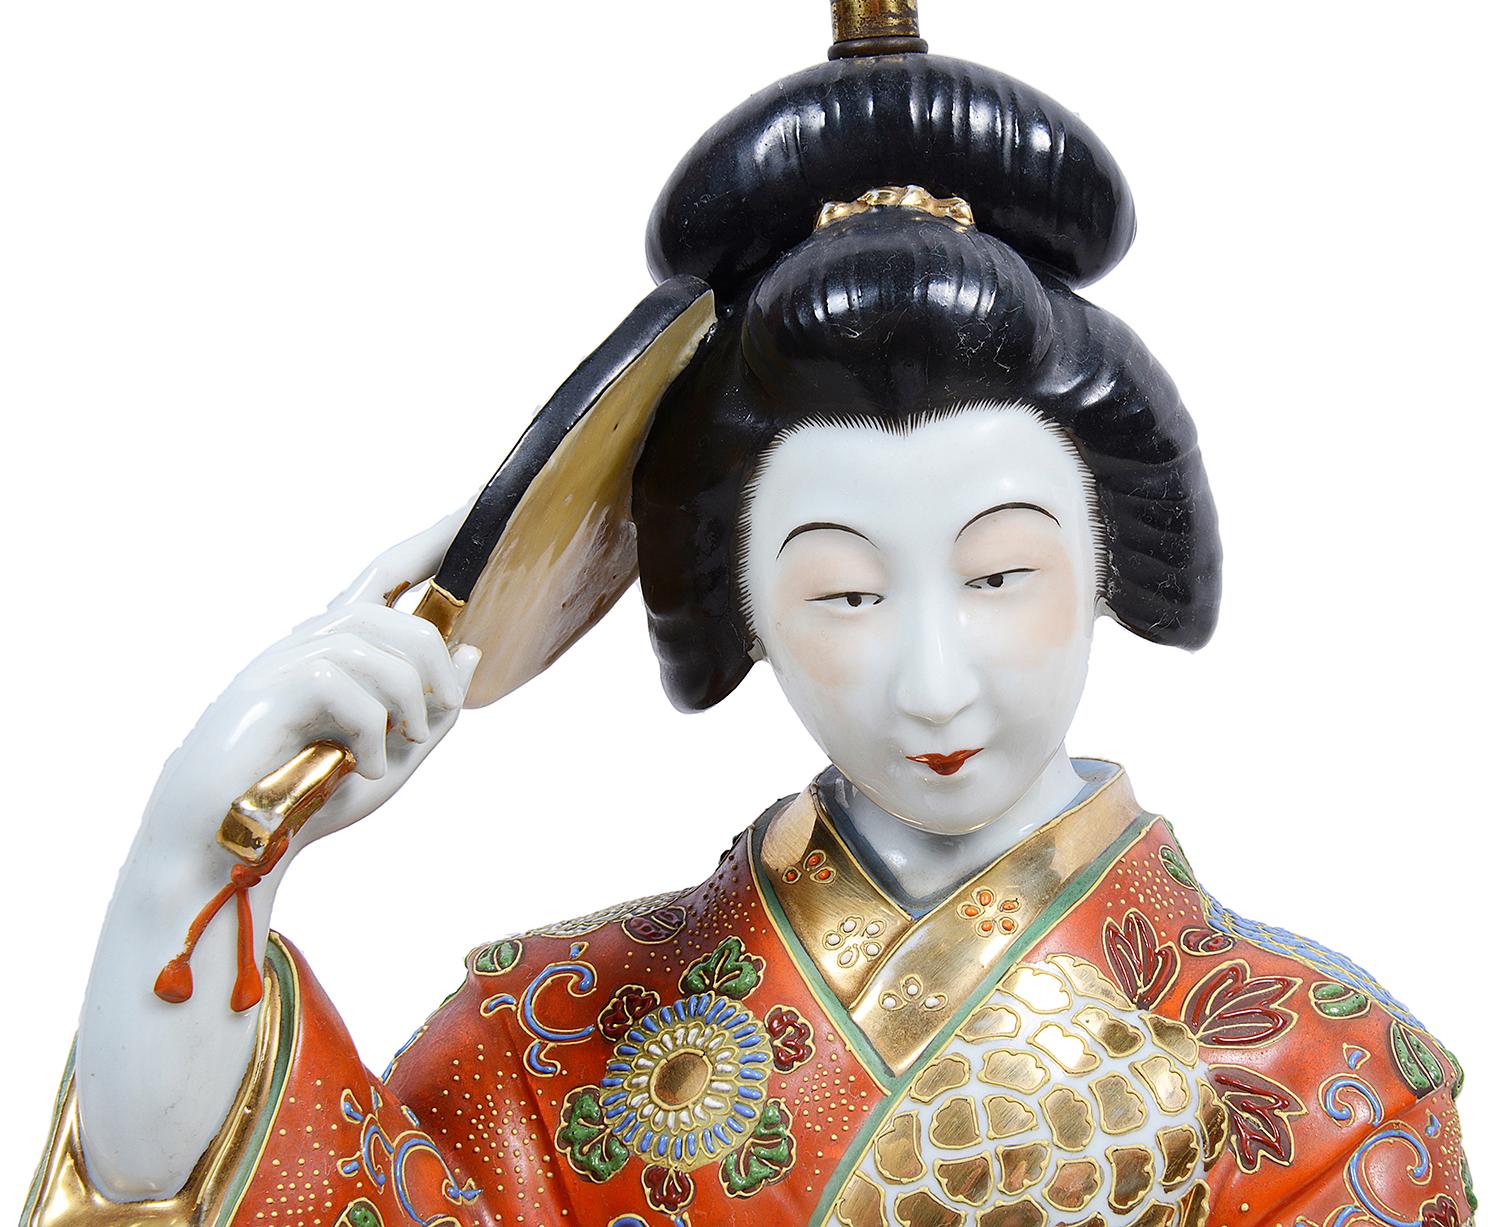 A good quality early 20th century Japanese Kutani porcelain figure of a Geisha girl, converted to a lamp.